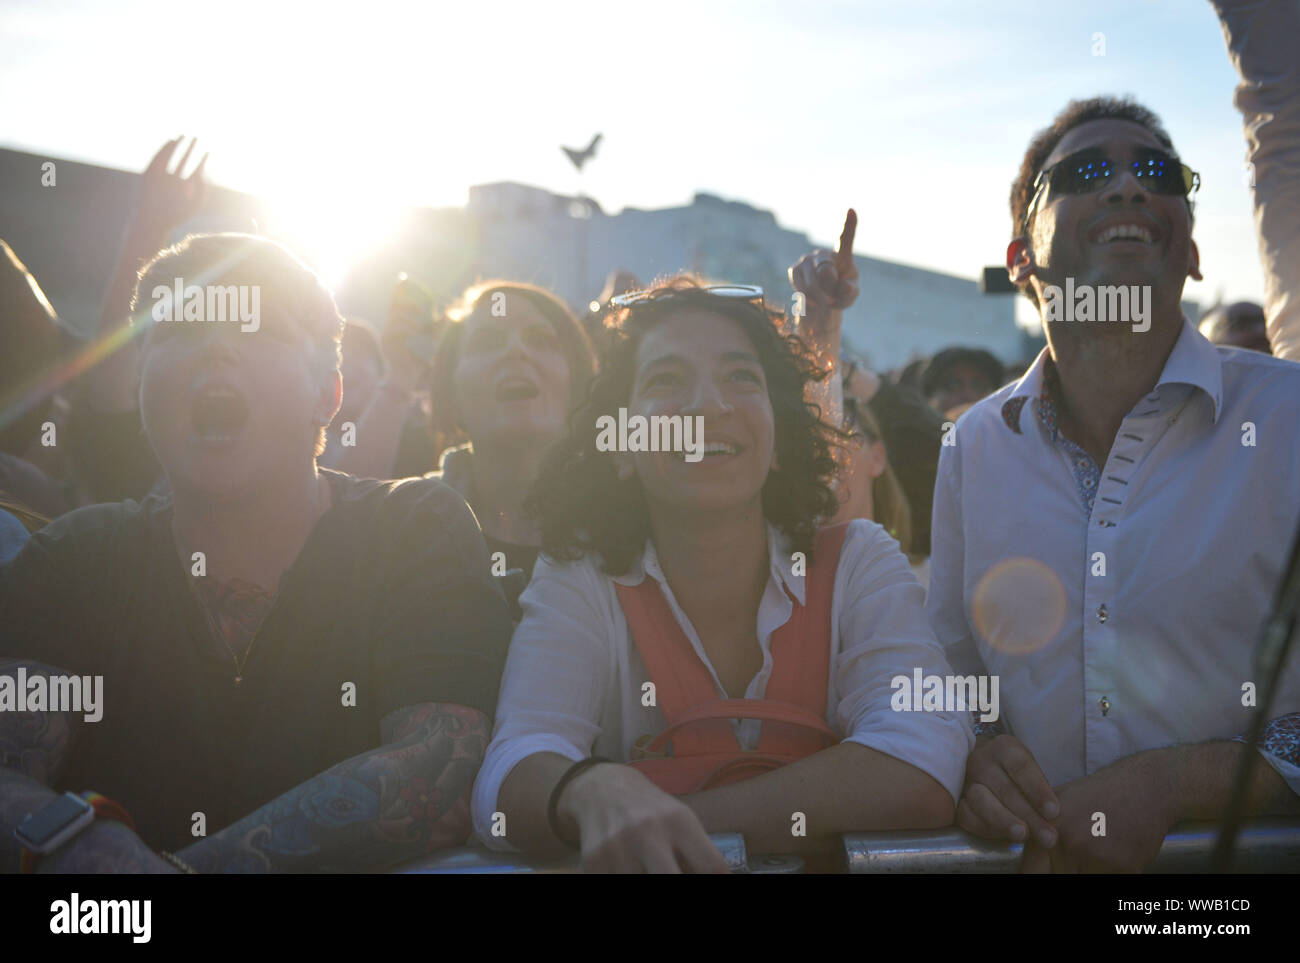 People watch Liam Gallagher performing during the Peaky Blinders Festival in Birmingham. Stock Photo